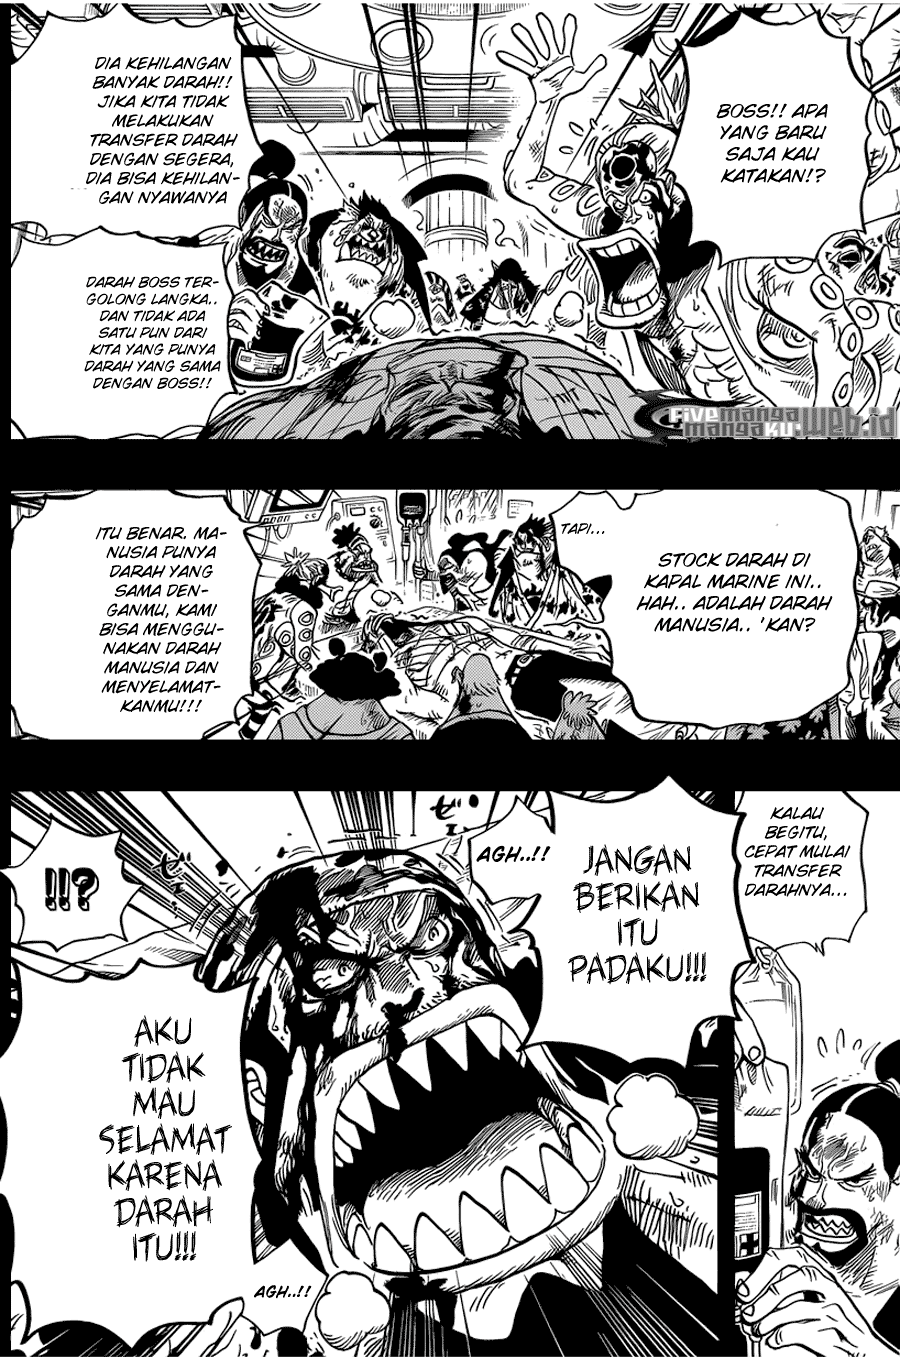 One Piece Chapter 623 – Si Bajak Laut Fisher Tiger - 147